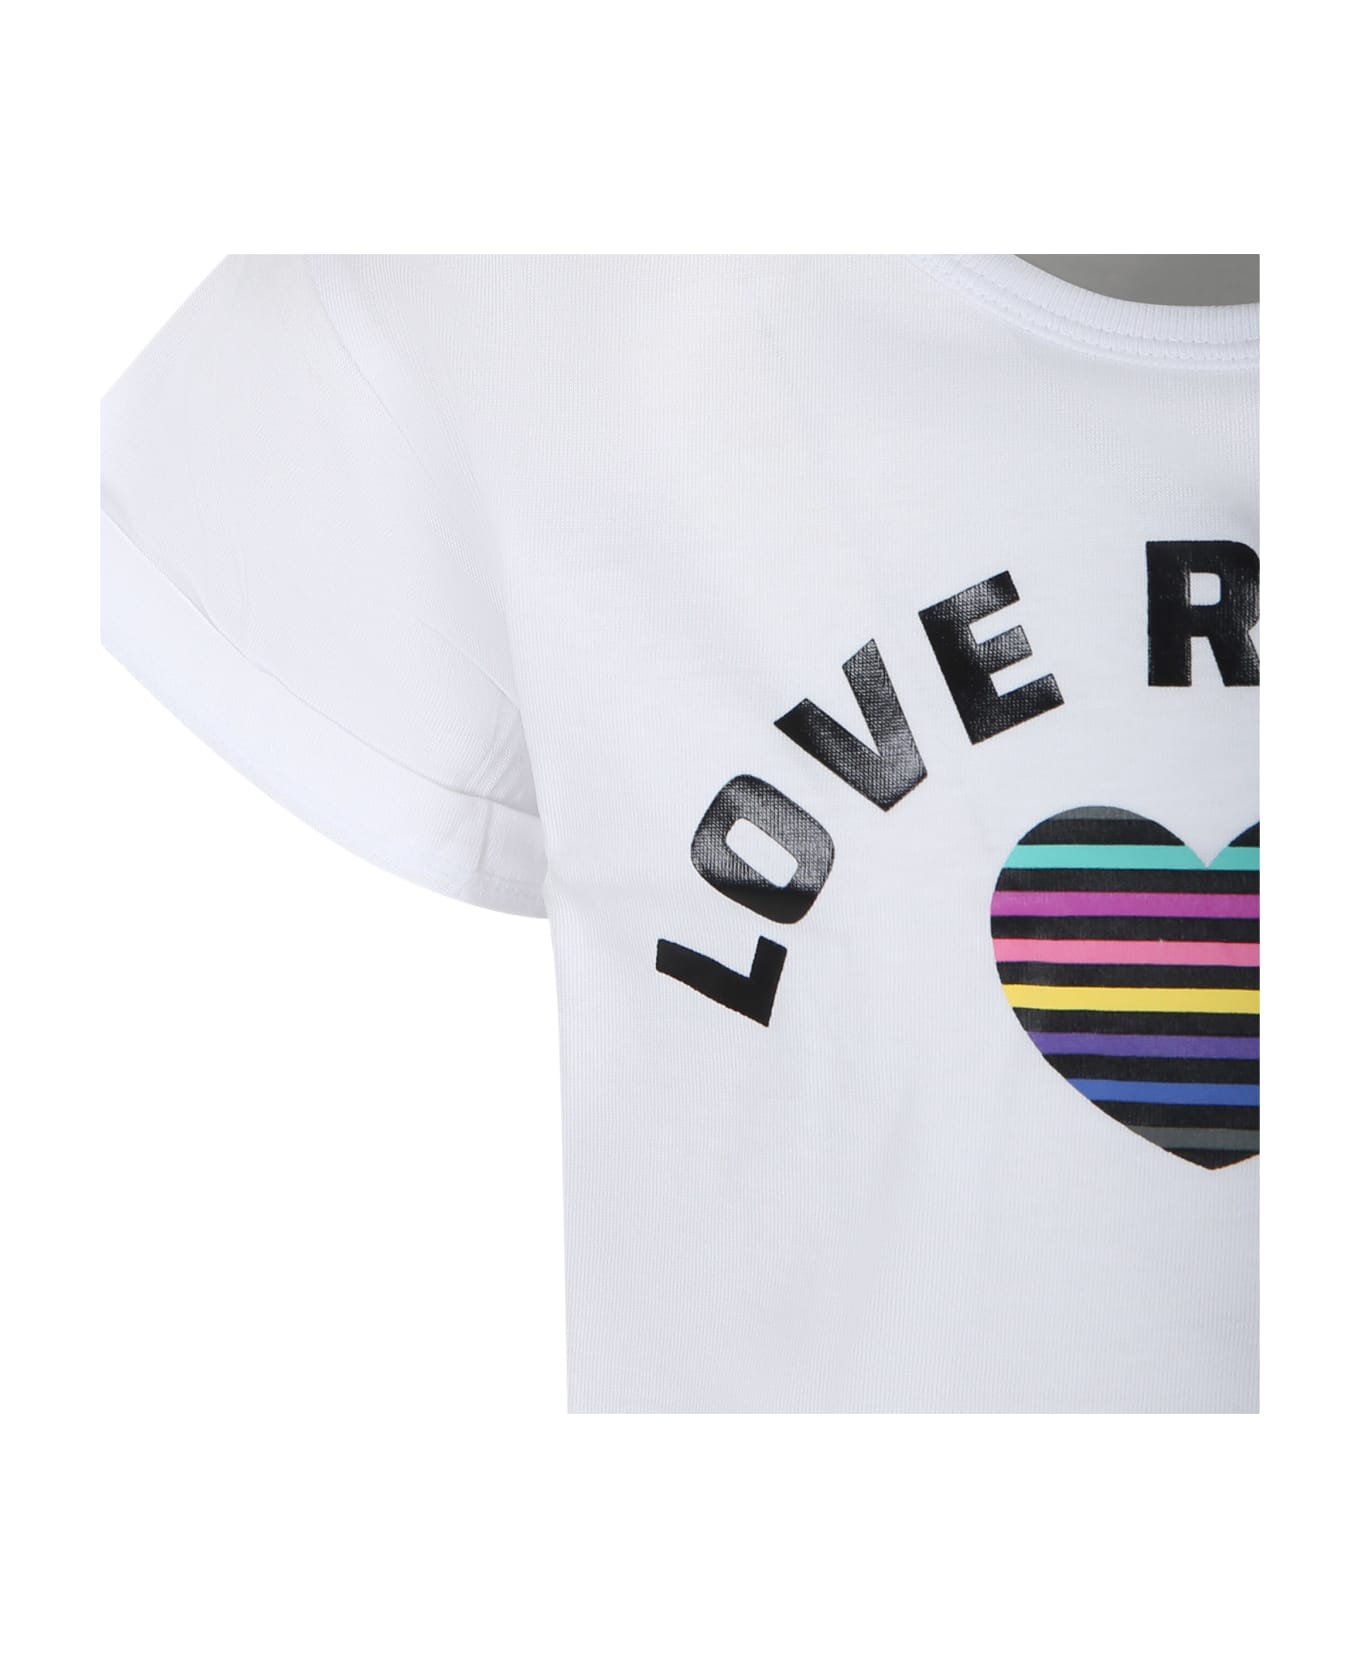 Rykiel Enfant Whitecrop T-shirt For Girl With Logo And Heart - White